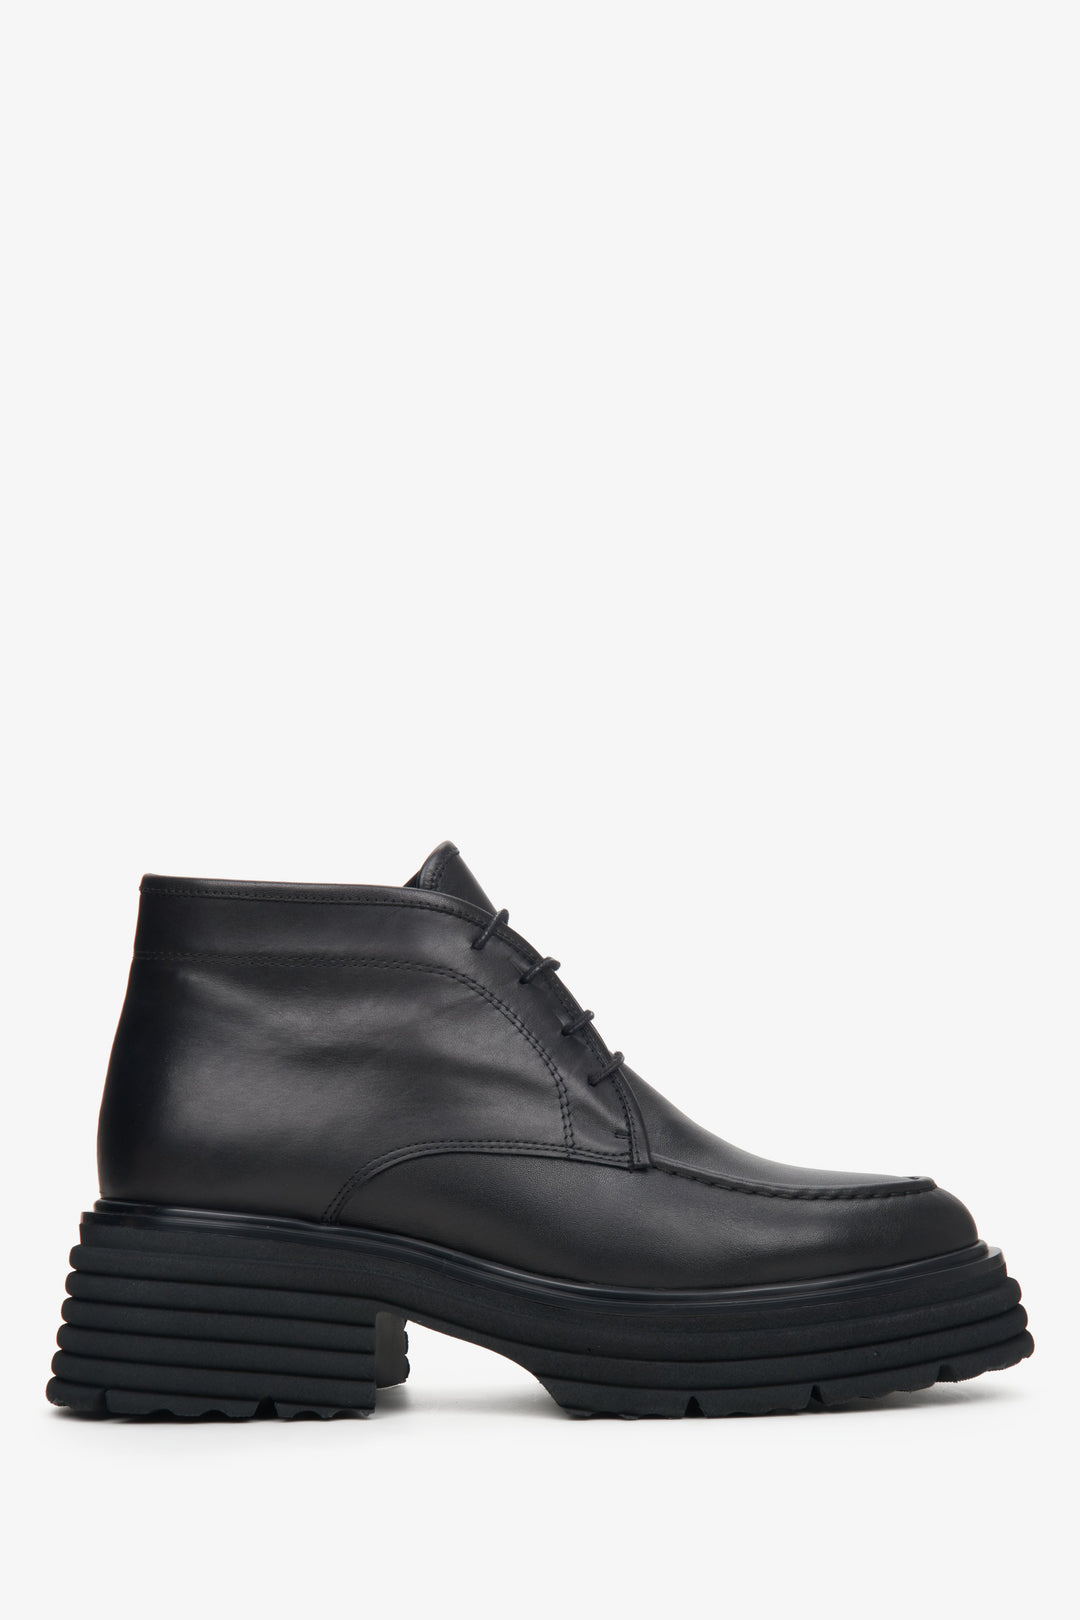 Women's Black Low Top Boots made of Genuine Leather Estro ER00114038.